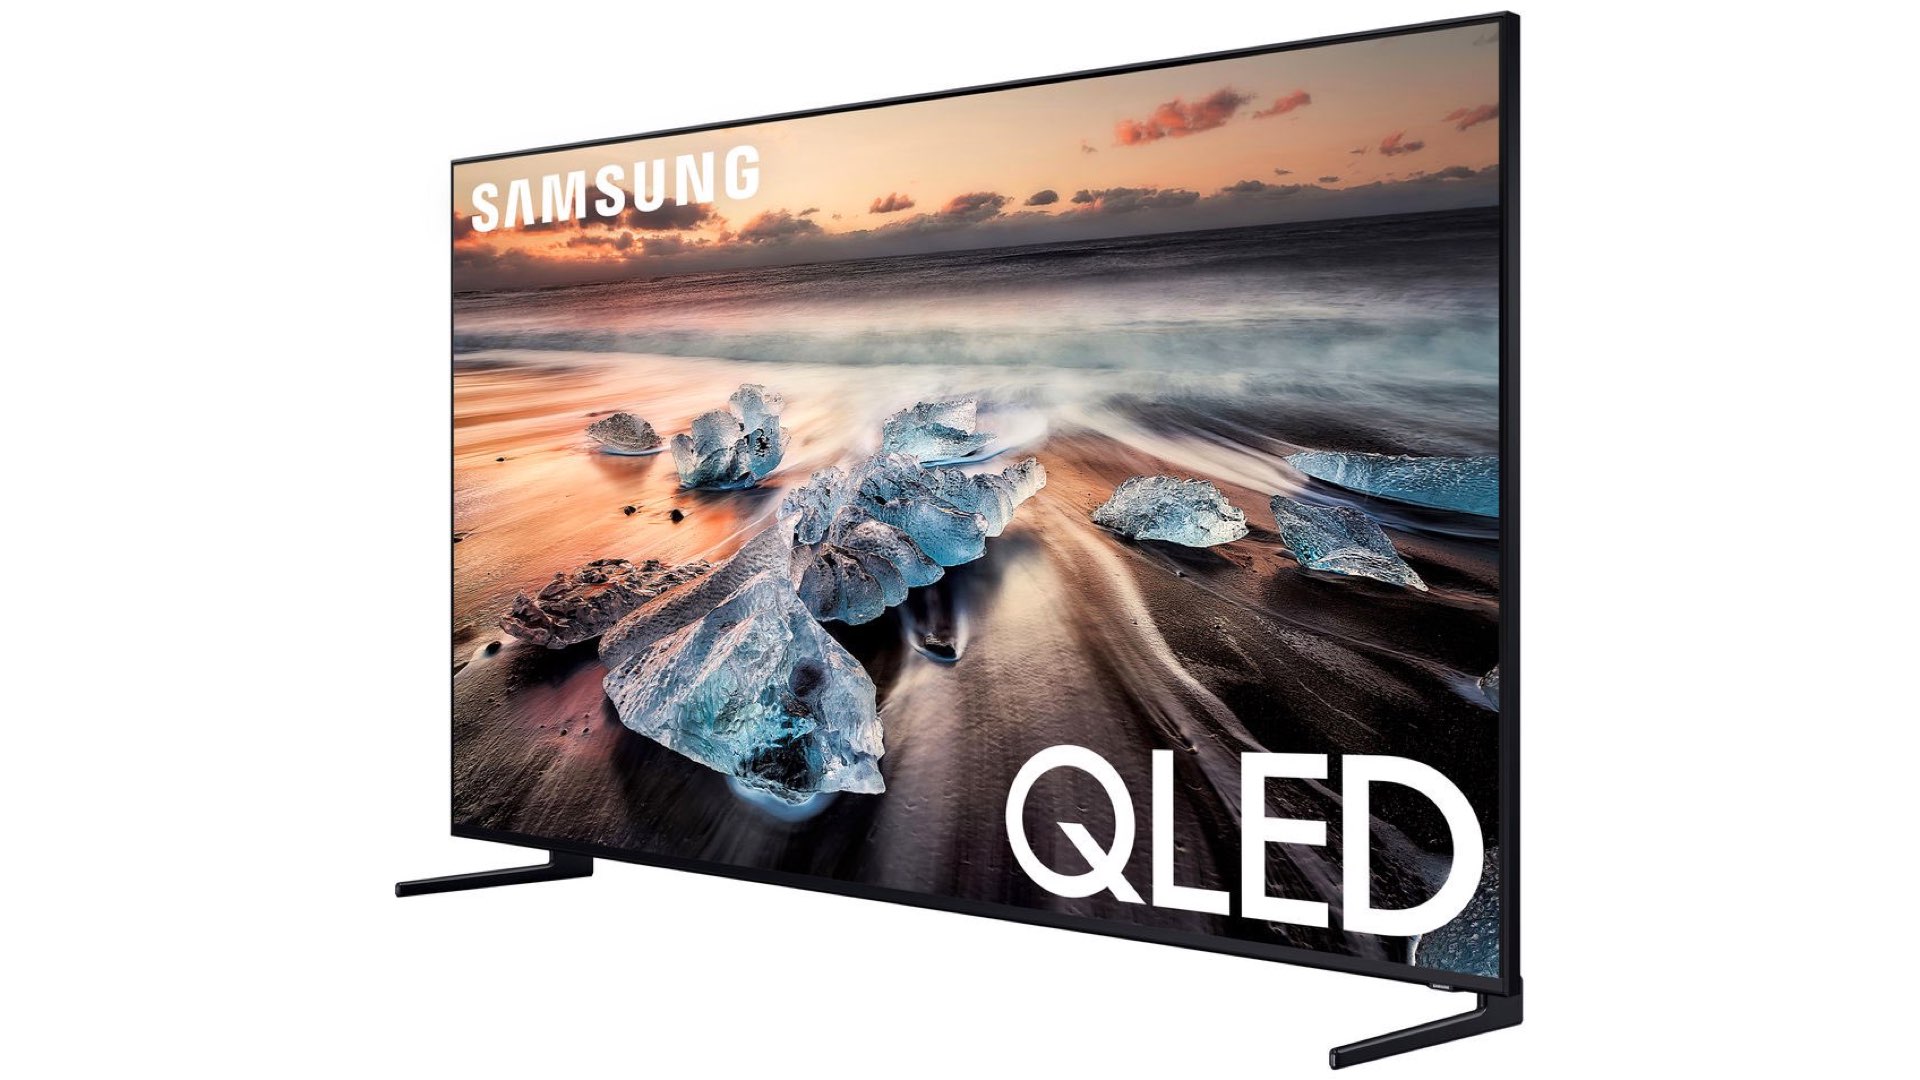 The Most Expensive 8K TV (Samsung Q900 98” HDR) Is Now On Sale For $50,000  Off! - Y.M.Cinema Magazine